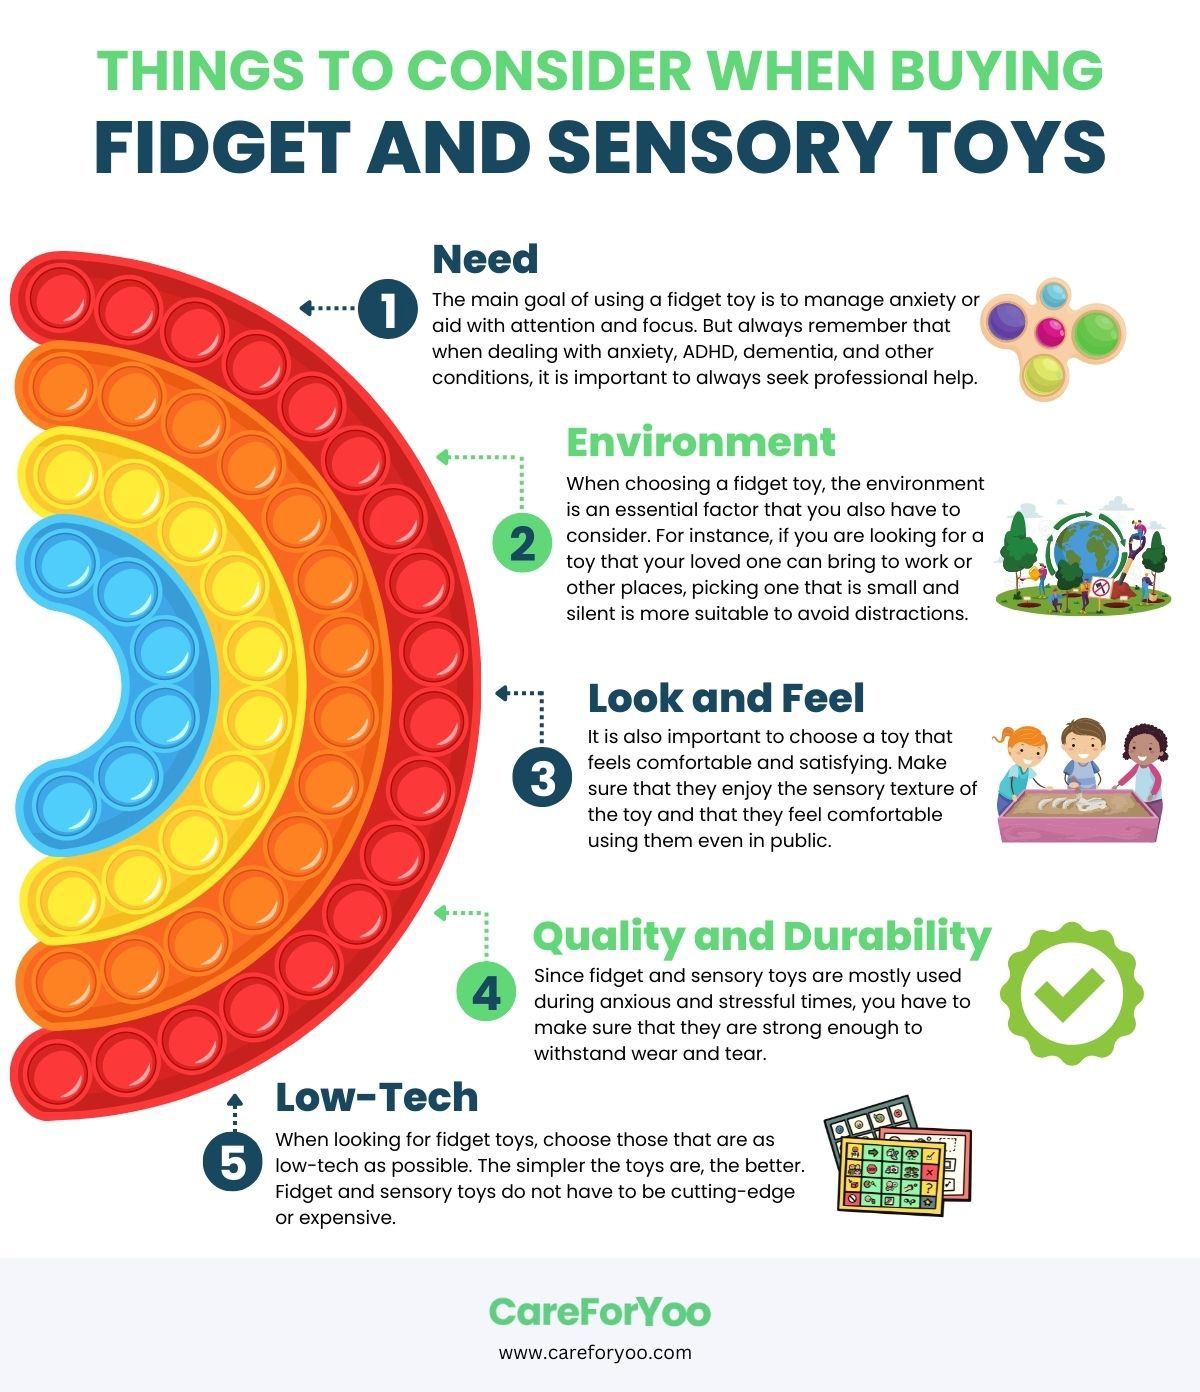 Things-to-Consider-When-Buying-Fidget-and-Sensory-Toys